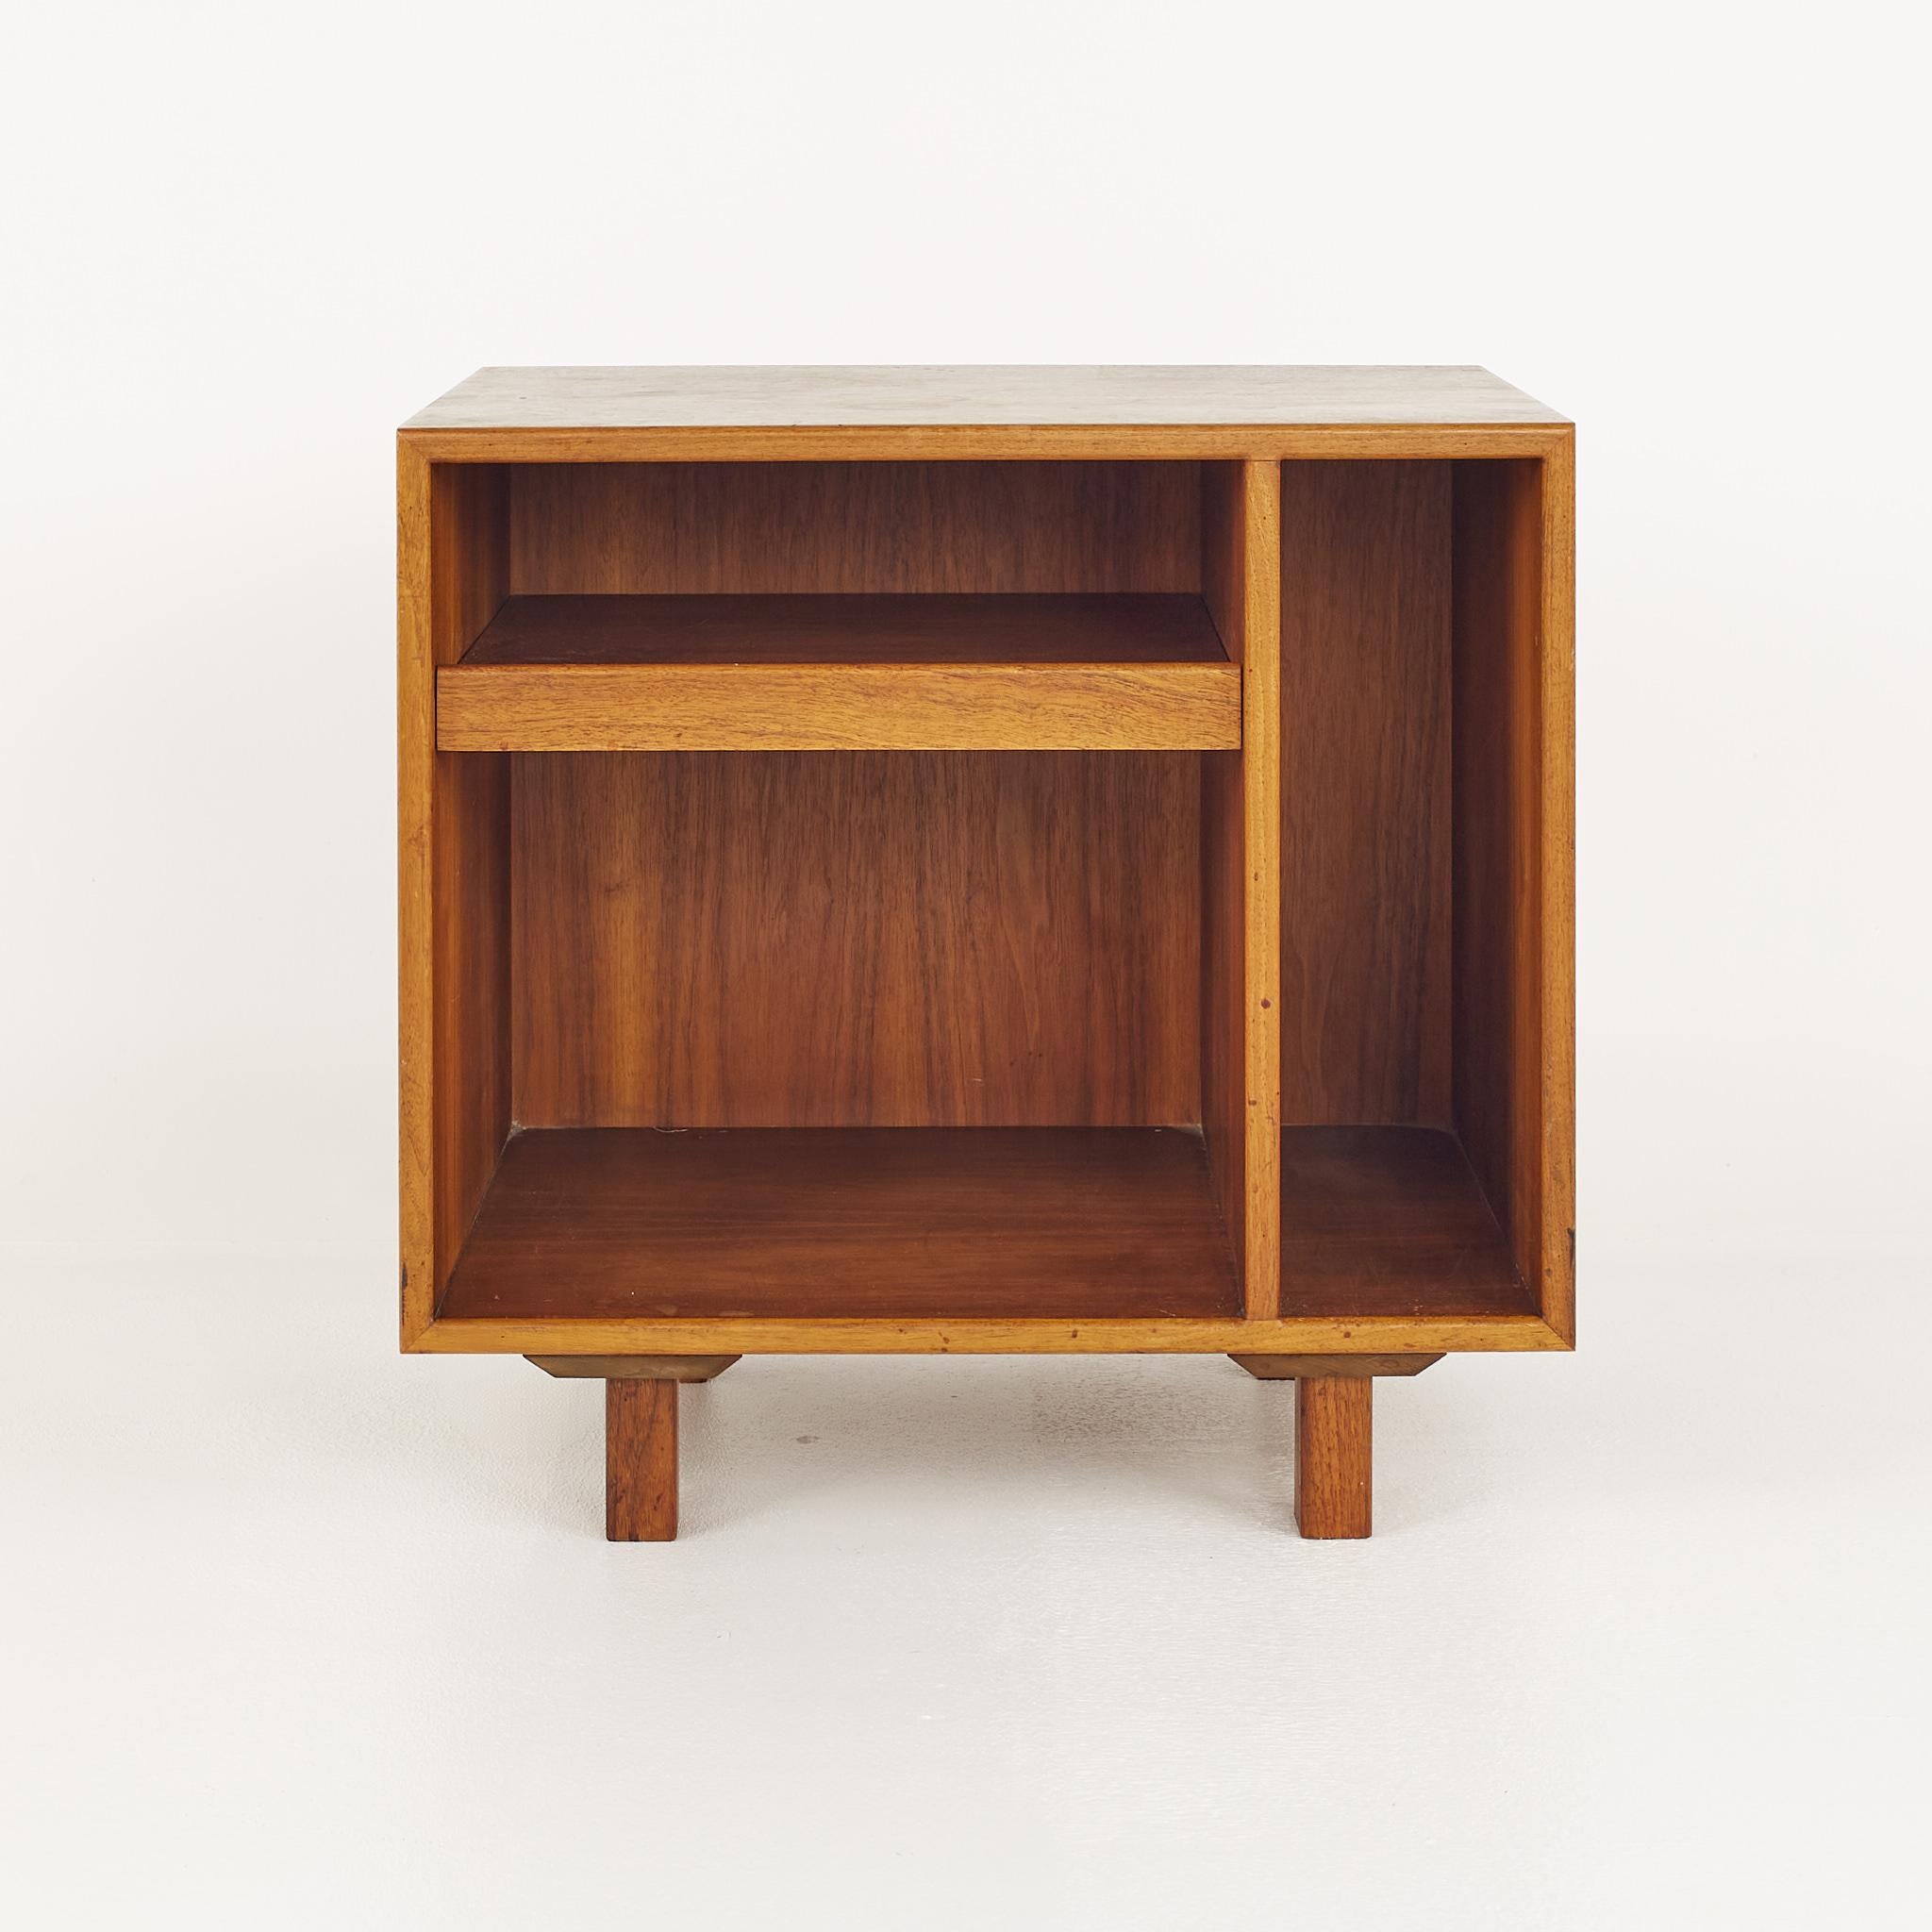 Jens Risom mid century walnut compact media console

This console measures: 24 wide x 18 deep x 23.5 inches high

?All pieces of furniture can be had in what we call restored vintage condition. That means the piece is restored upon purchase so